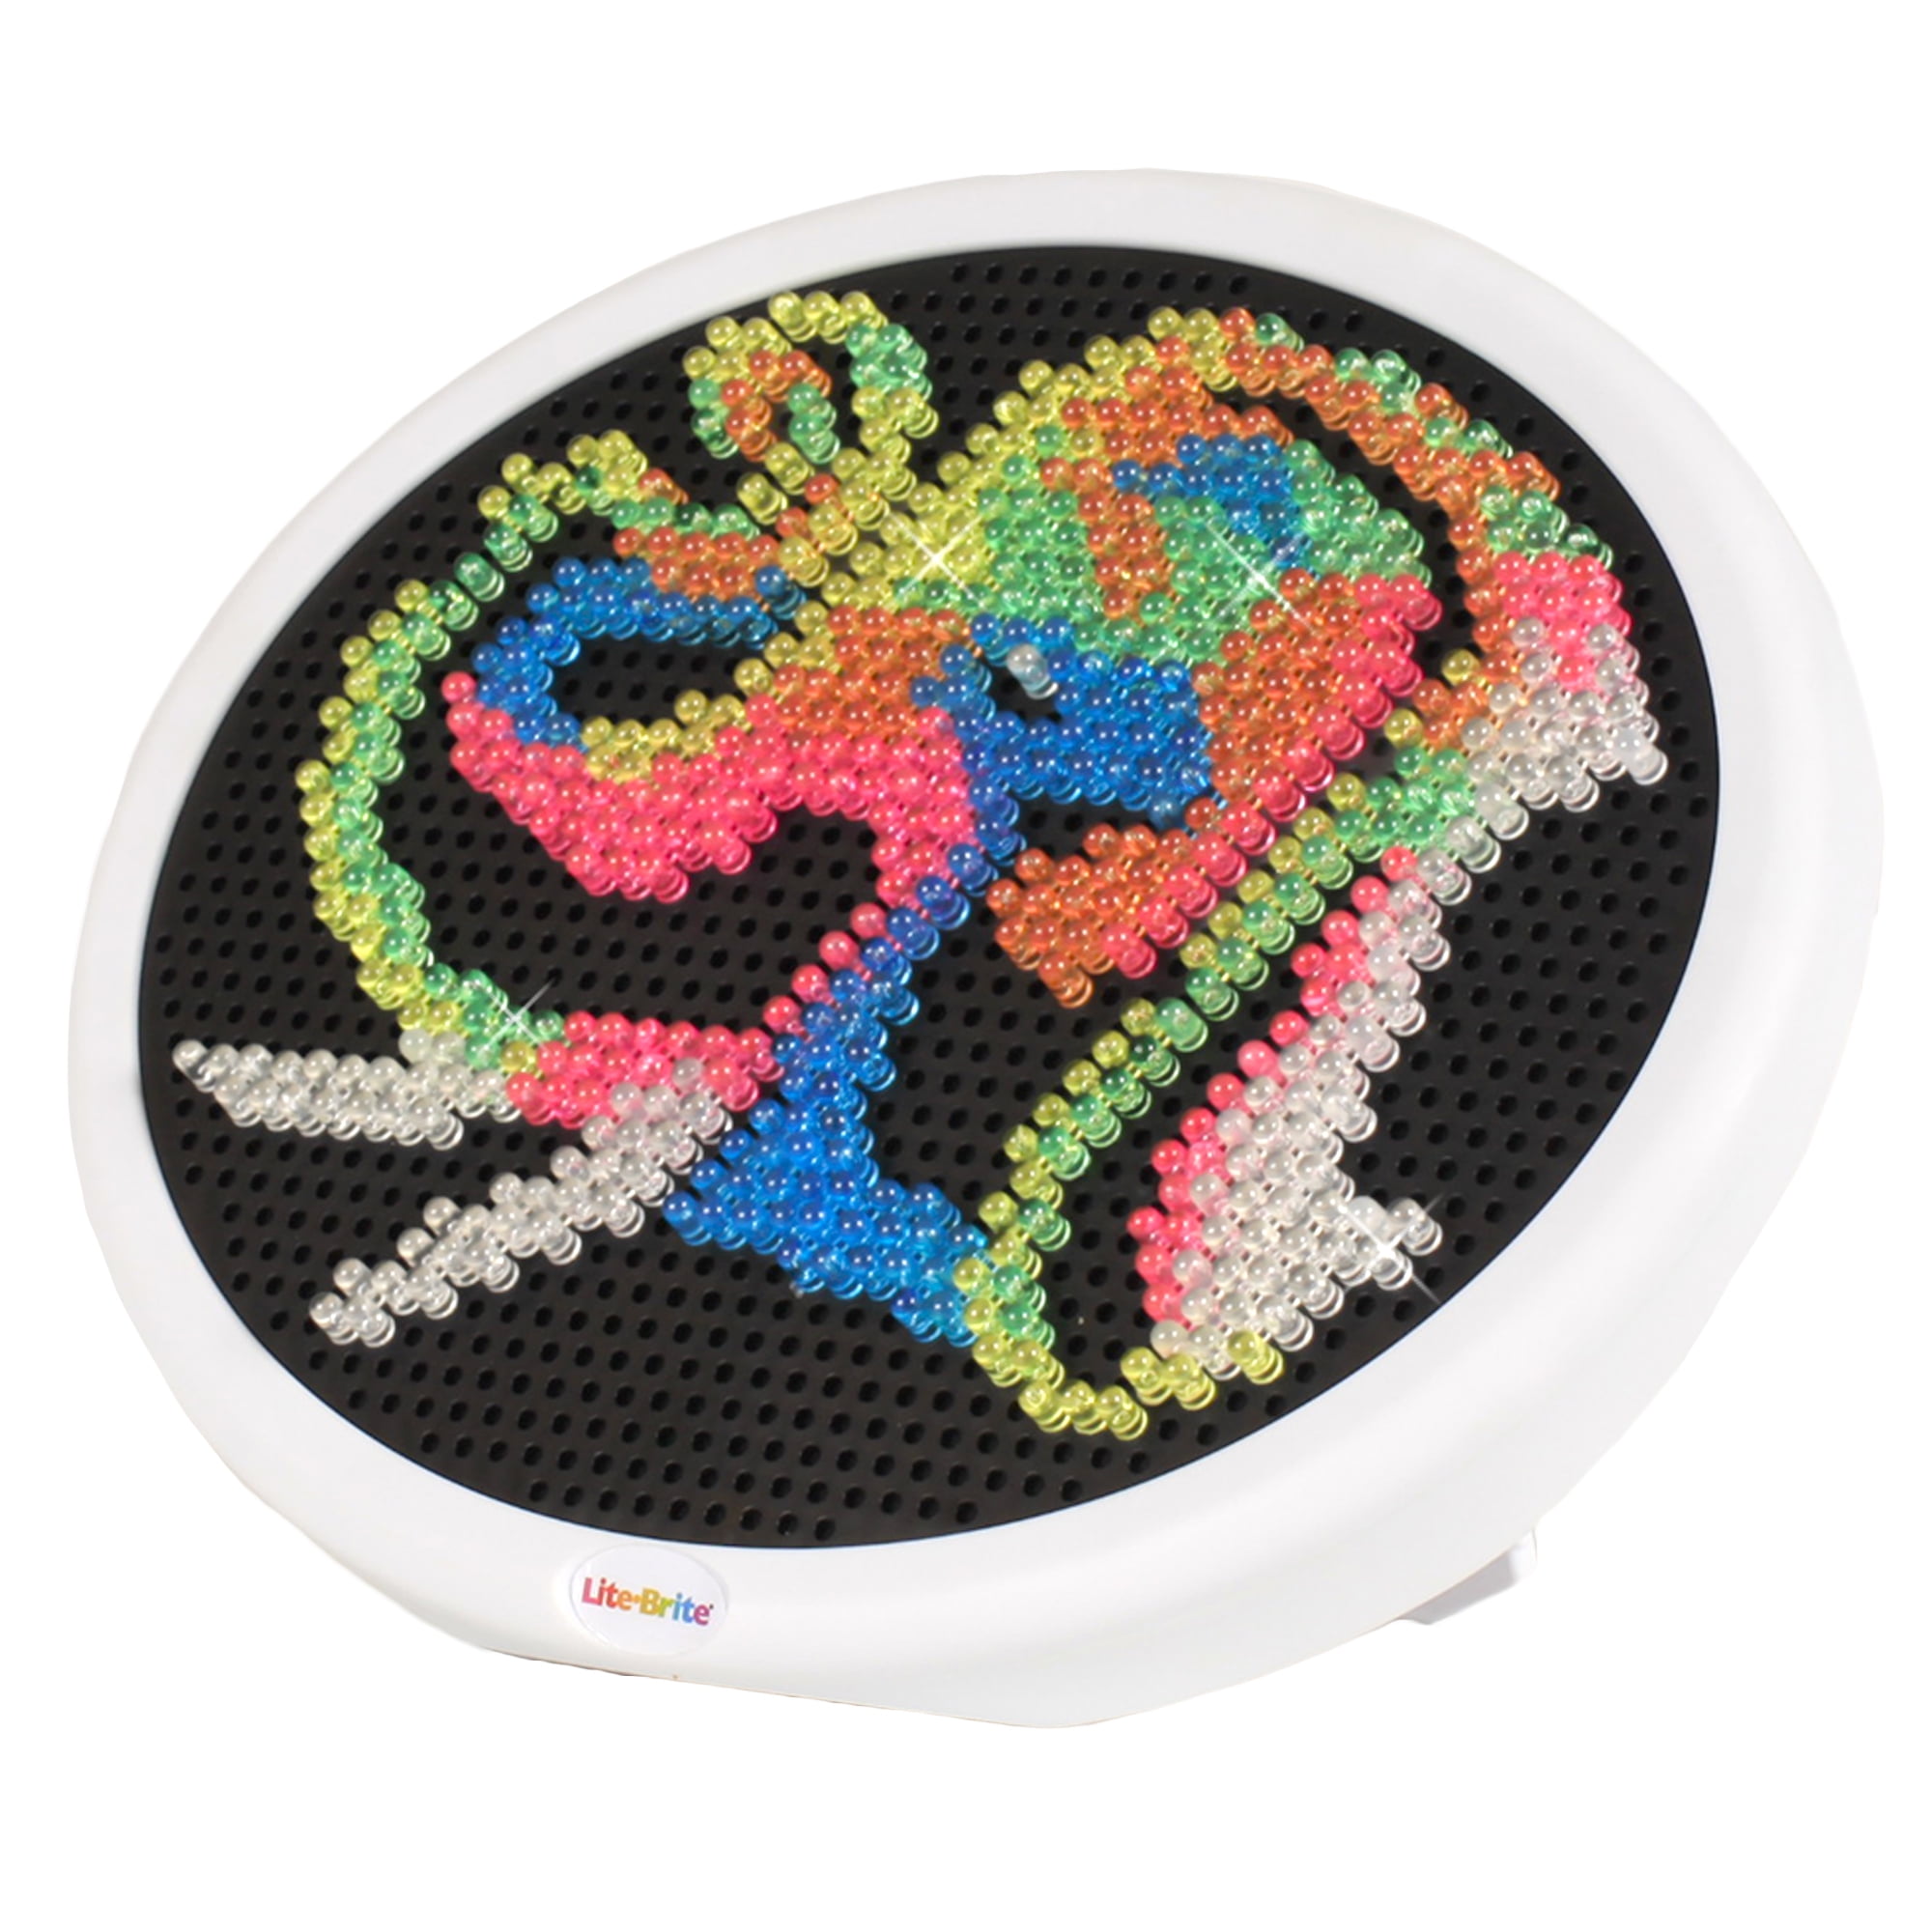 Lite Brite Oval HD Deluxe Edition with 900 Pegs